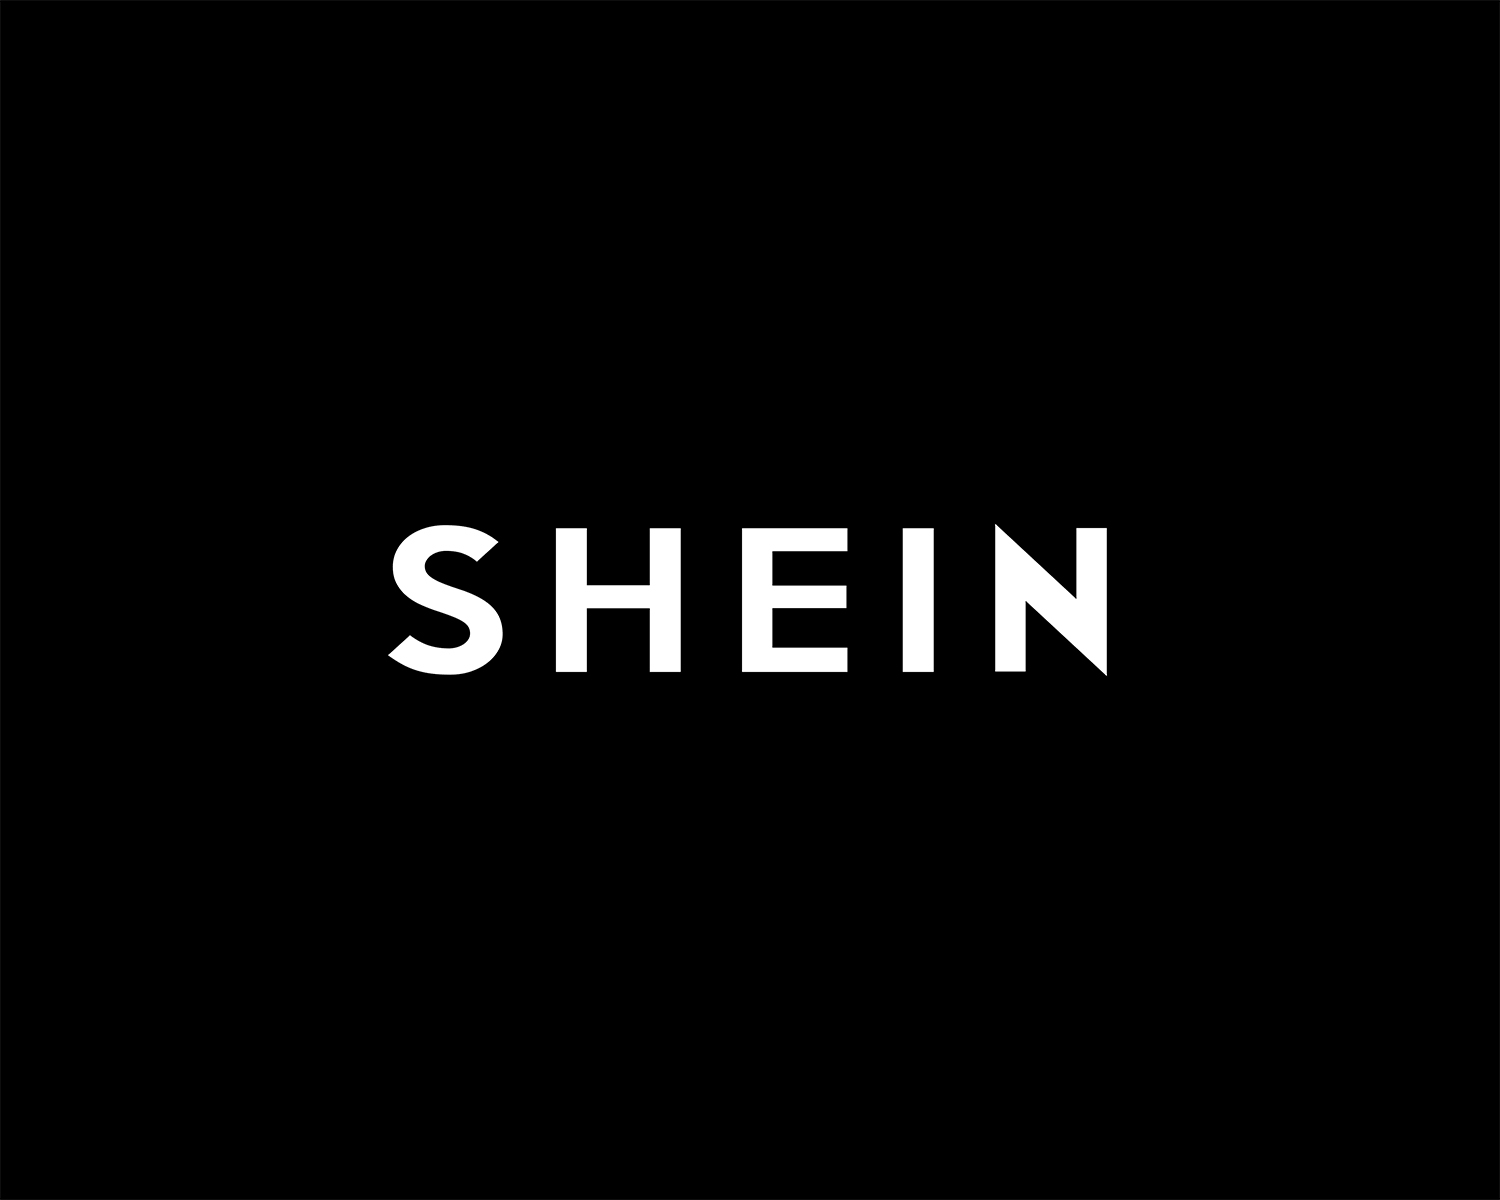 Shein - How to subscribe from China - USA2GEORGIA NEWS Portal